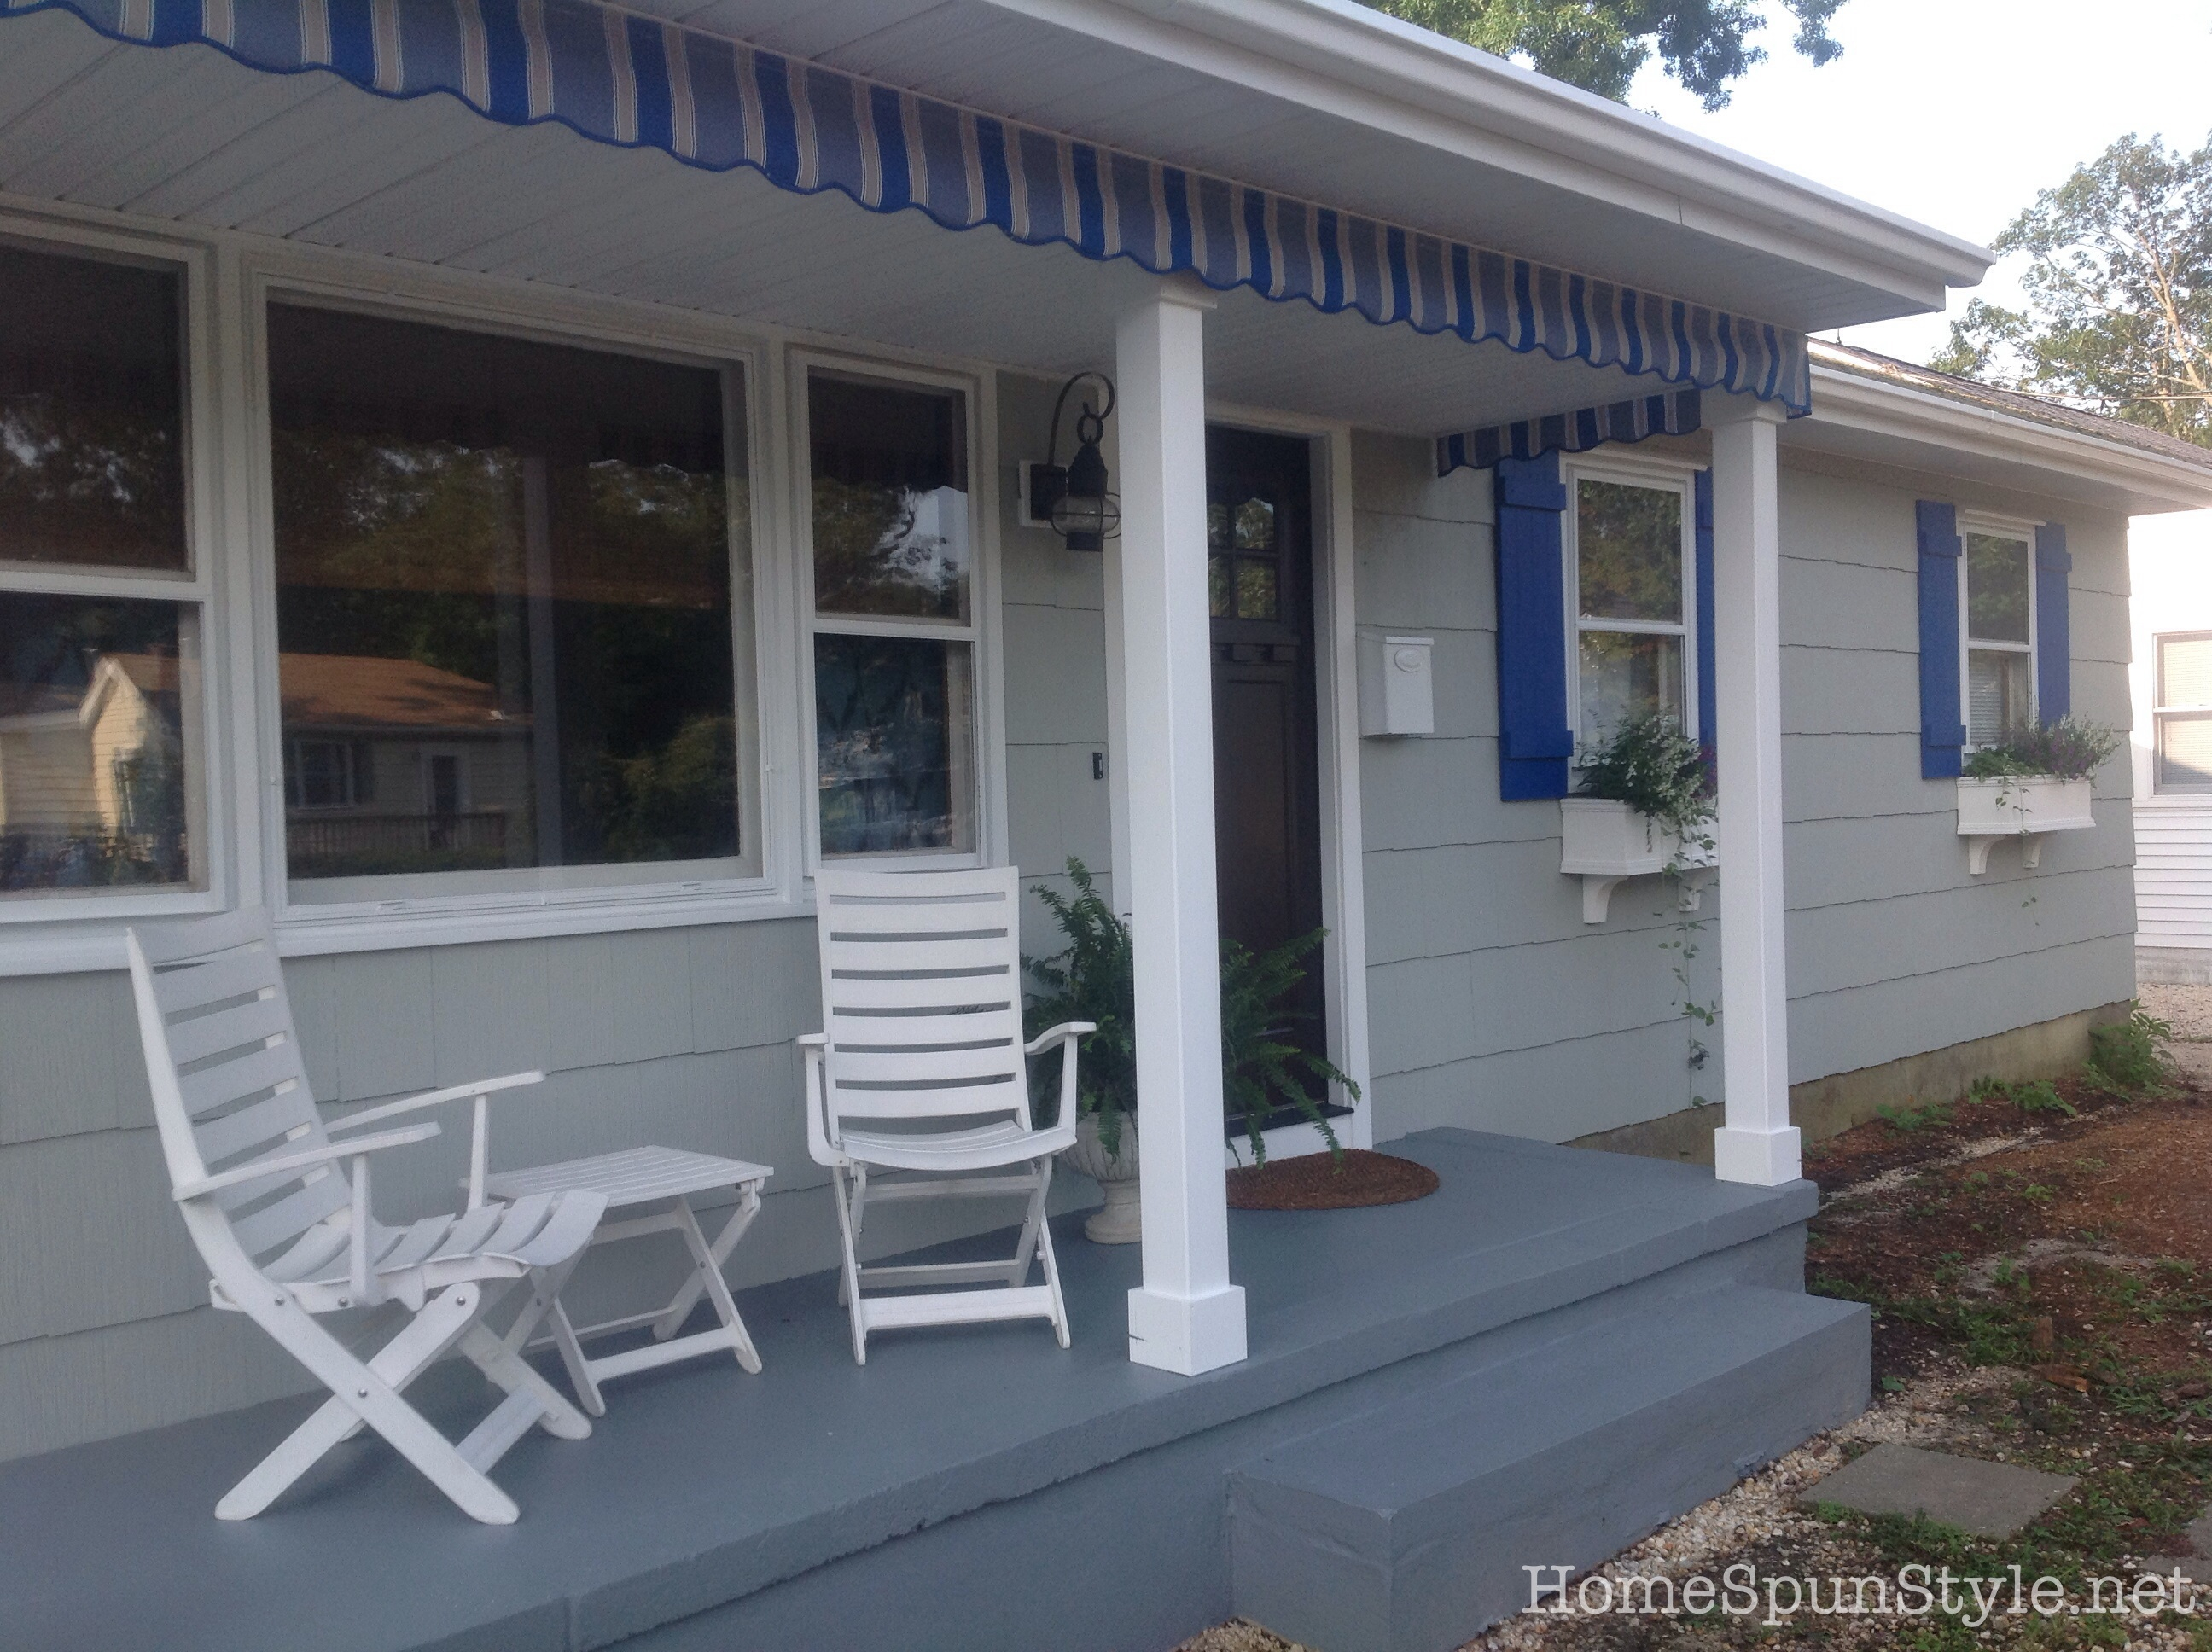 Awnings And Porch Valances Home Spun Style throughout sizing 2592 X 1936